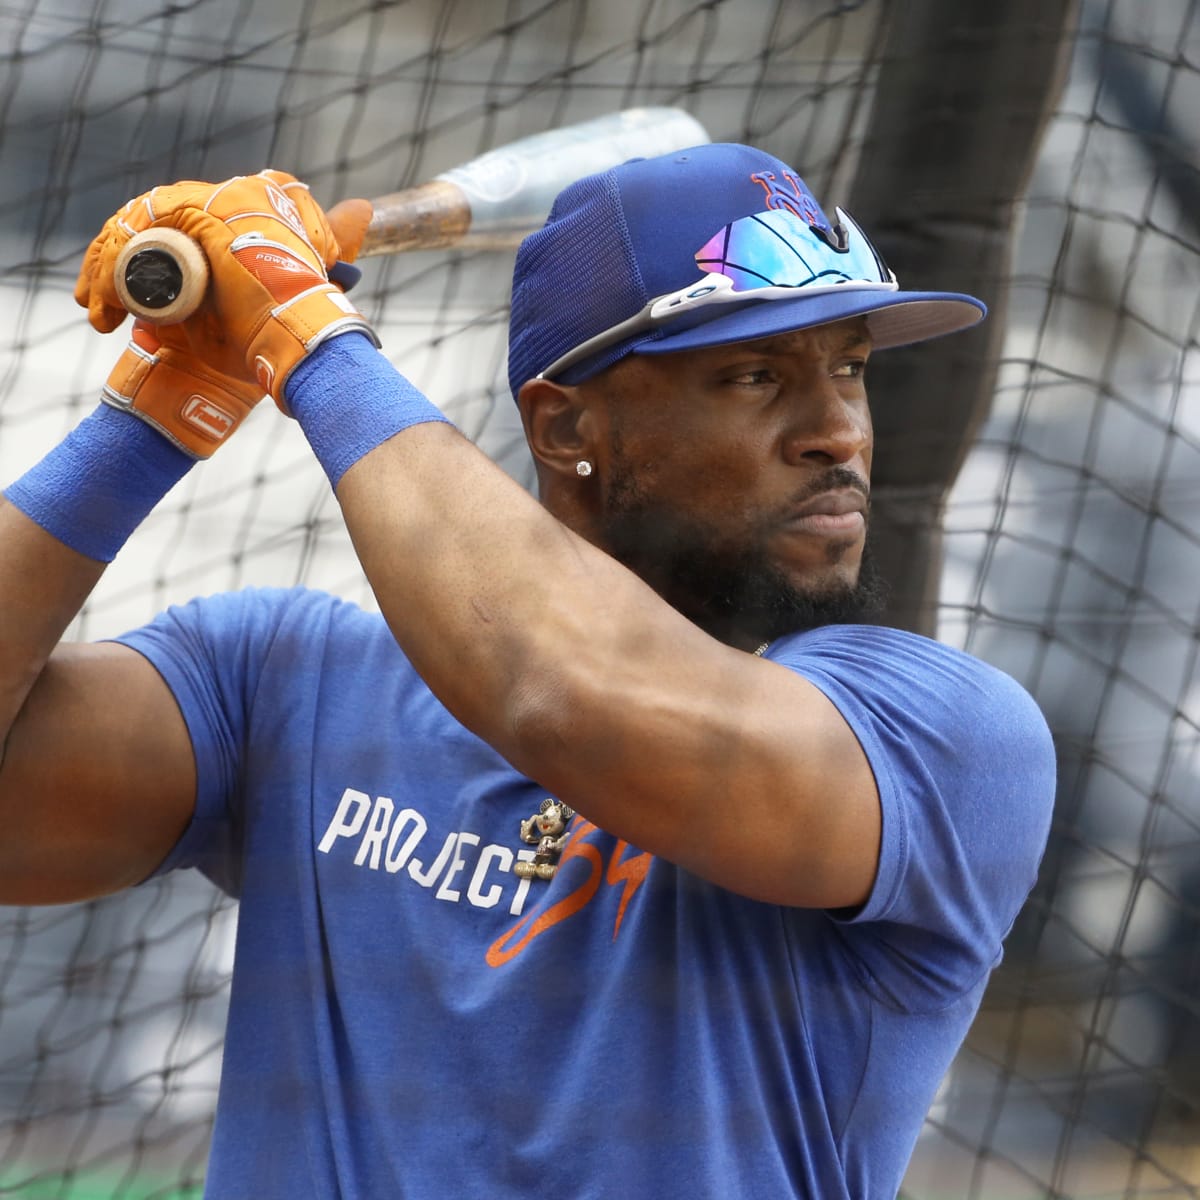 BREAKING NEWS: METS SIGN OF STARLING MARTE! (4YR/$78M Deal) 